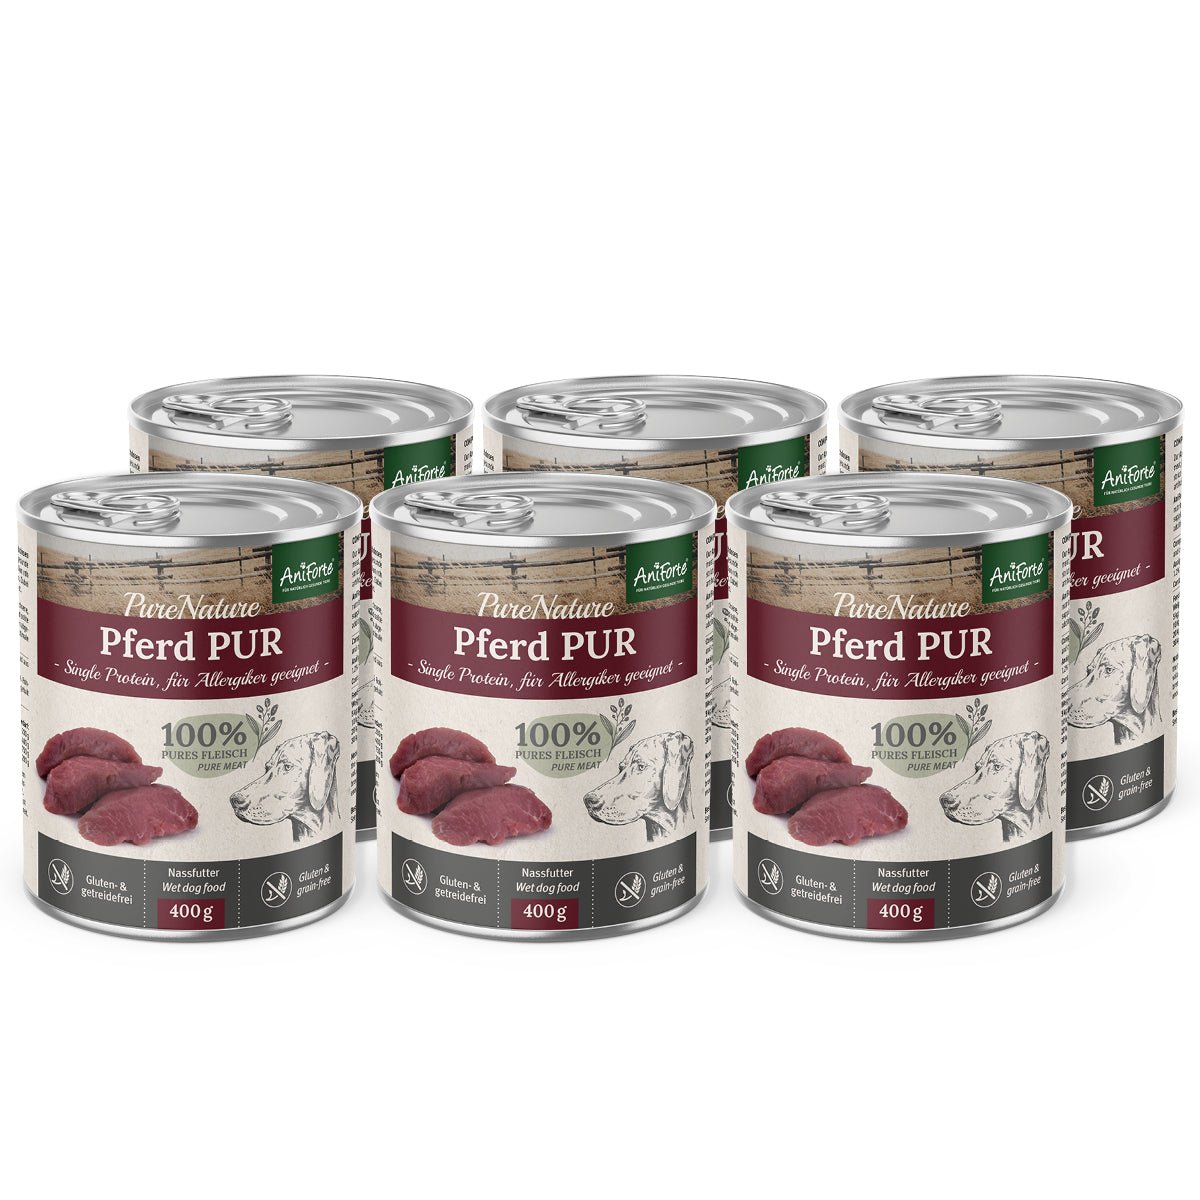 PureNature Pure Horse - Wet food for Dogs - AniForte UK